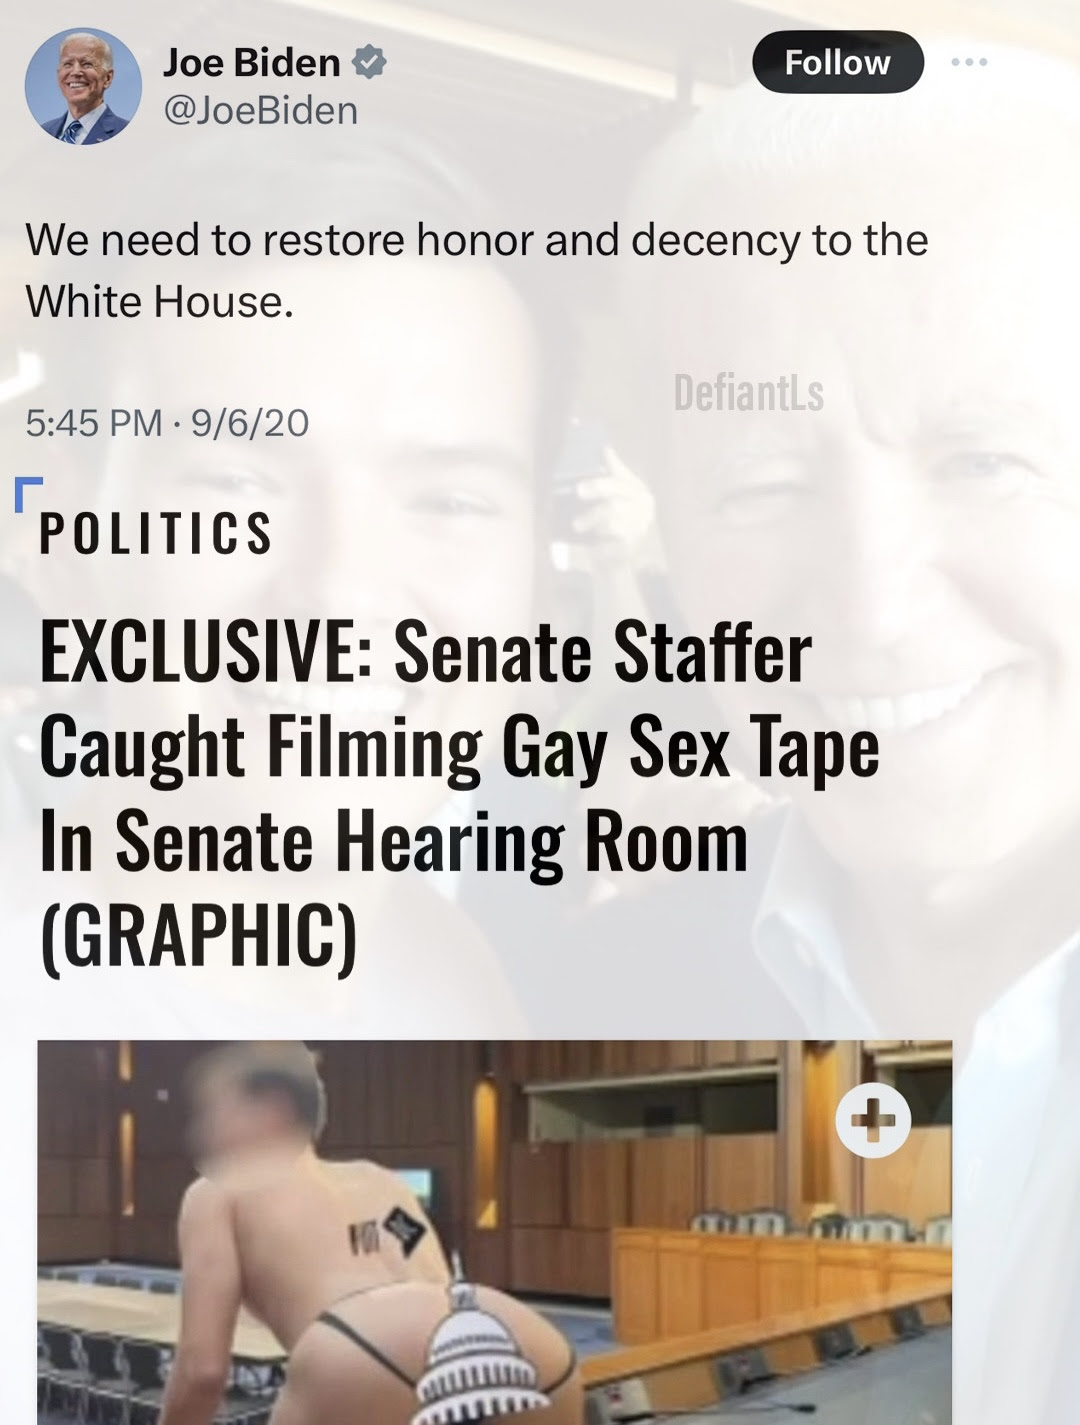 Hypocrite Joe Biden calling for decency while doing nothing about desecration of a Senate room.